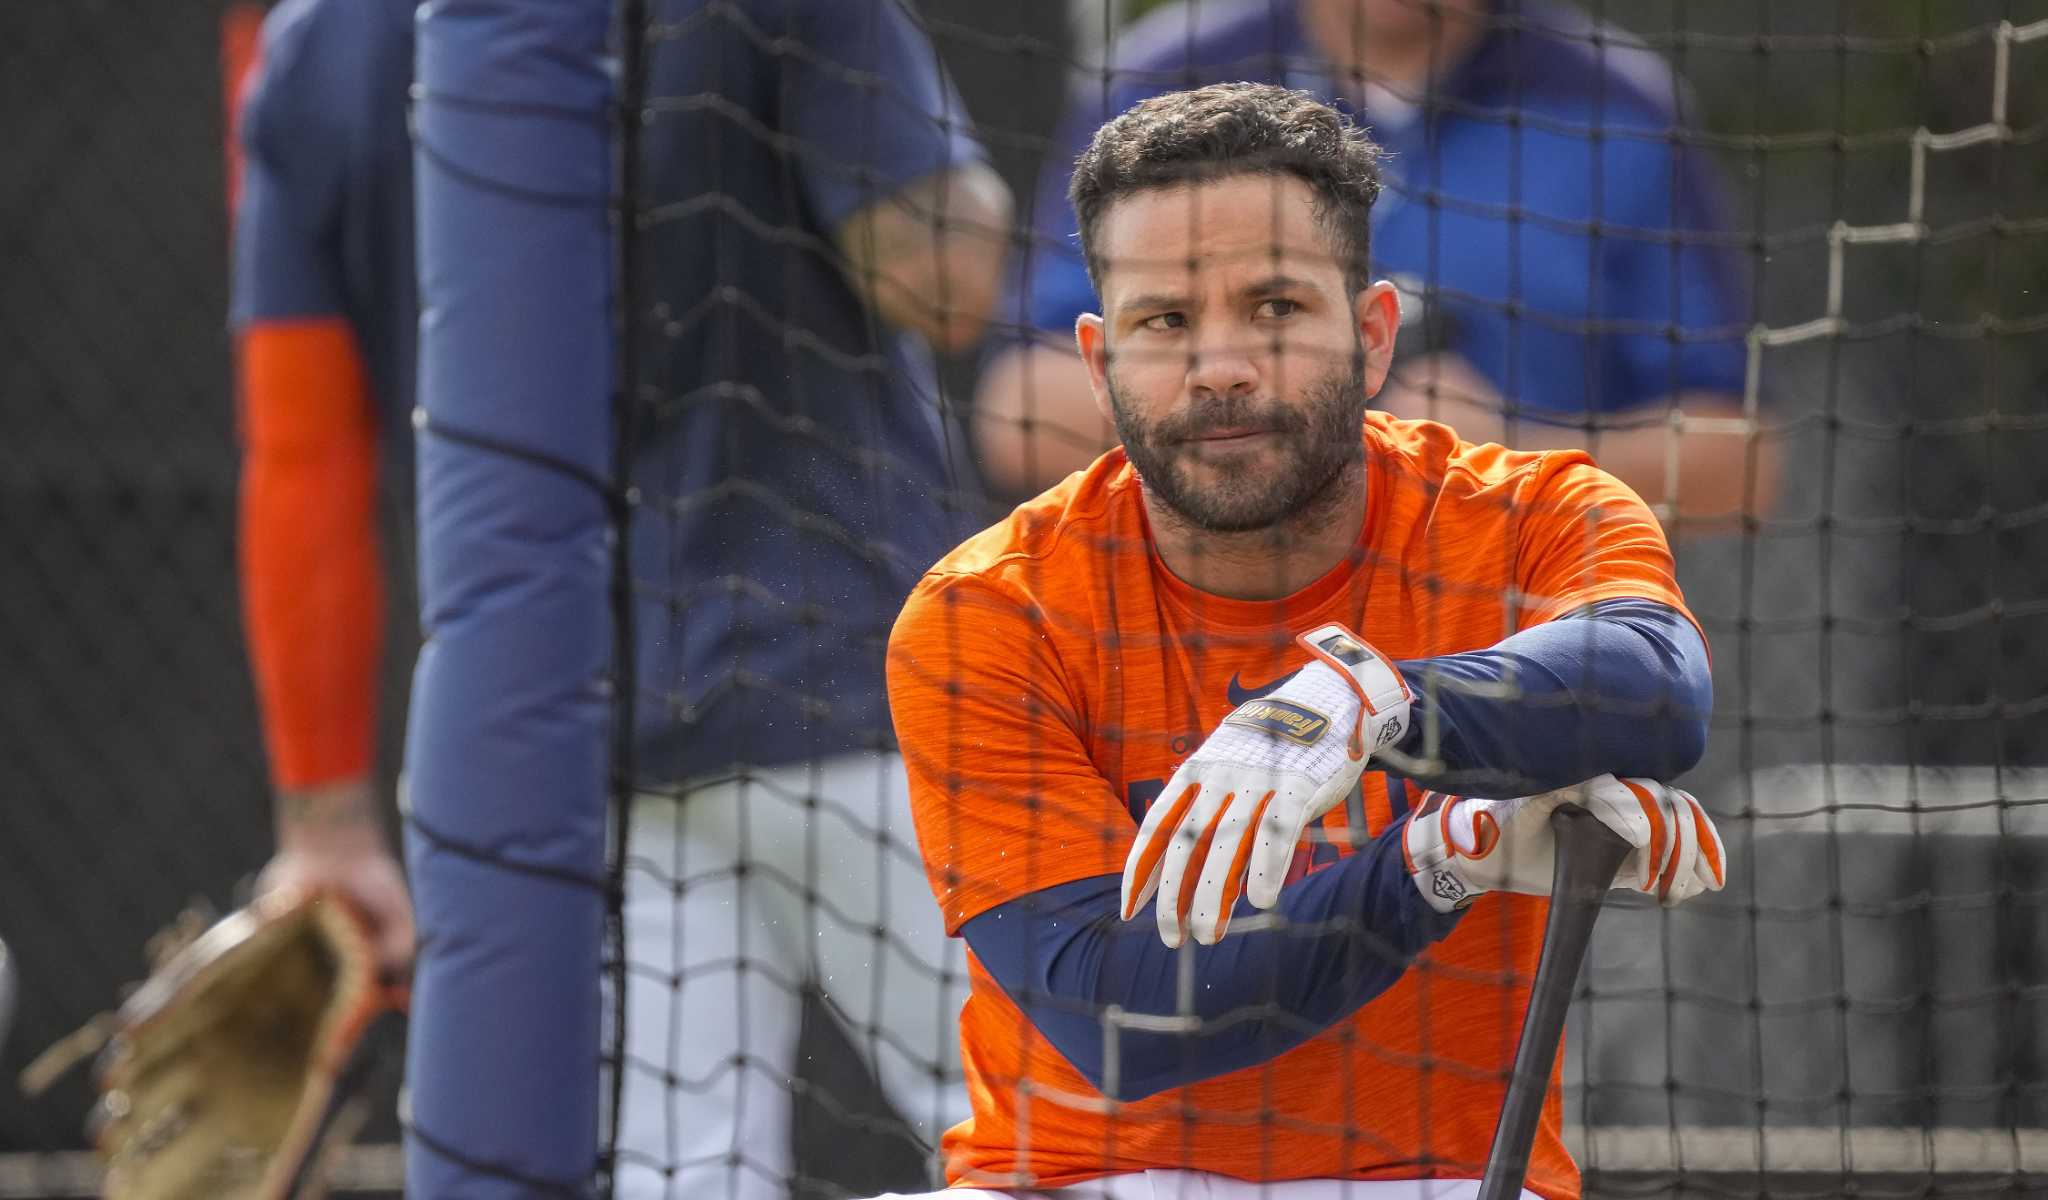 World Baseball Classic: Jose Altuve needs surgery on fractured thumb from  HBP, no timeline for return to Astros